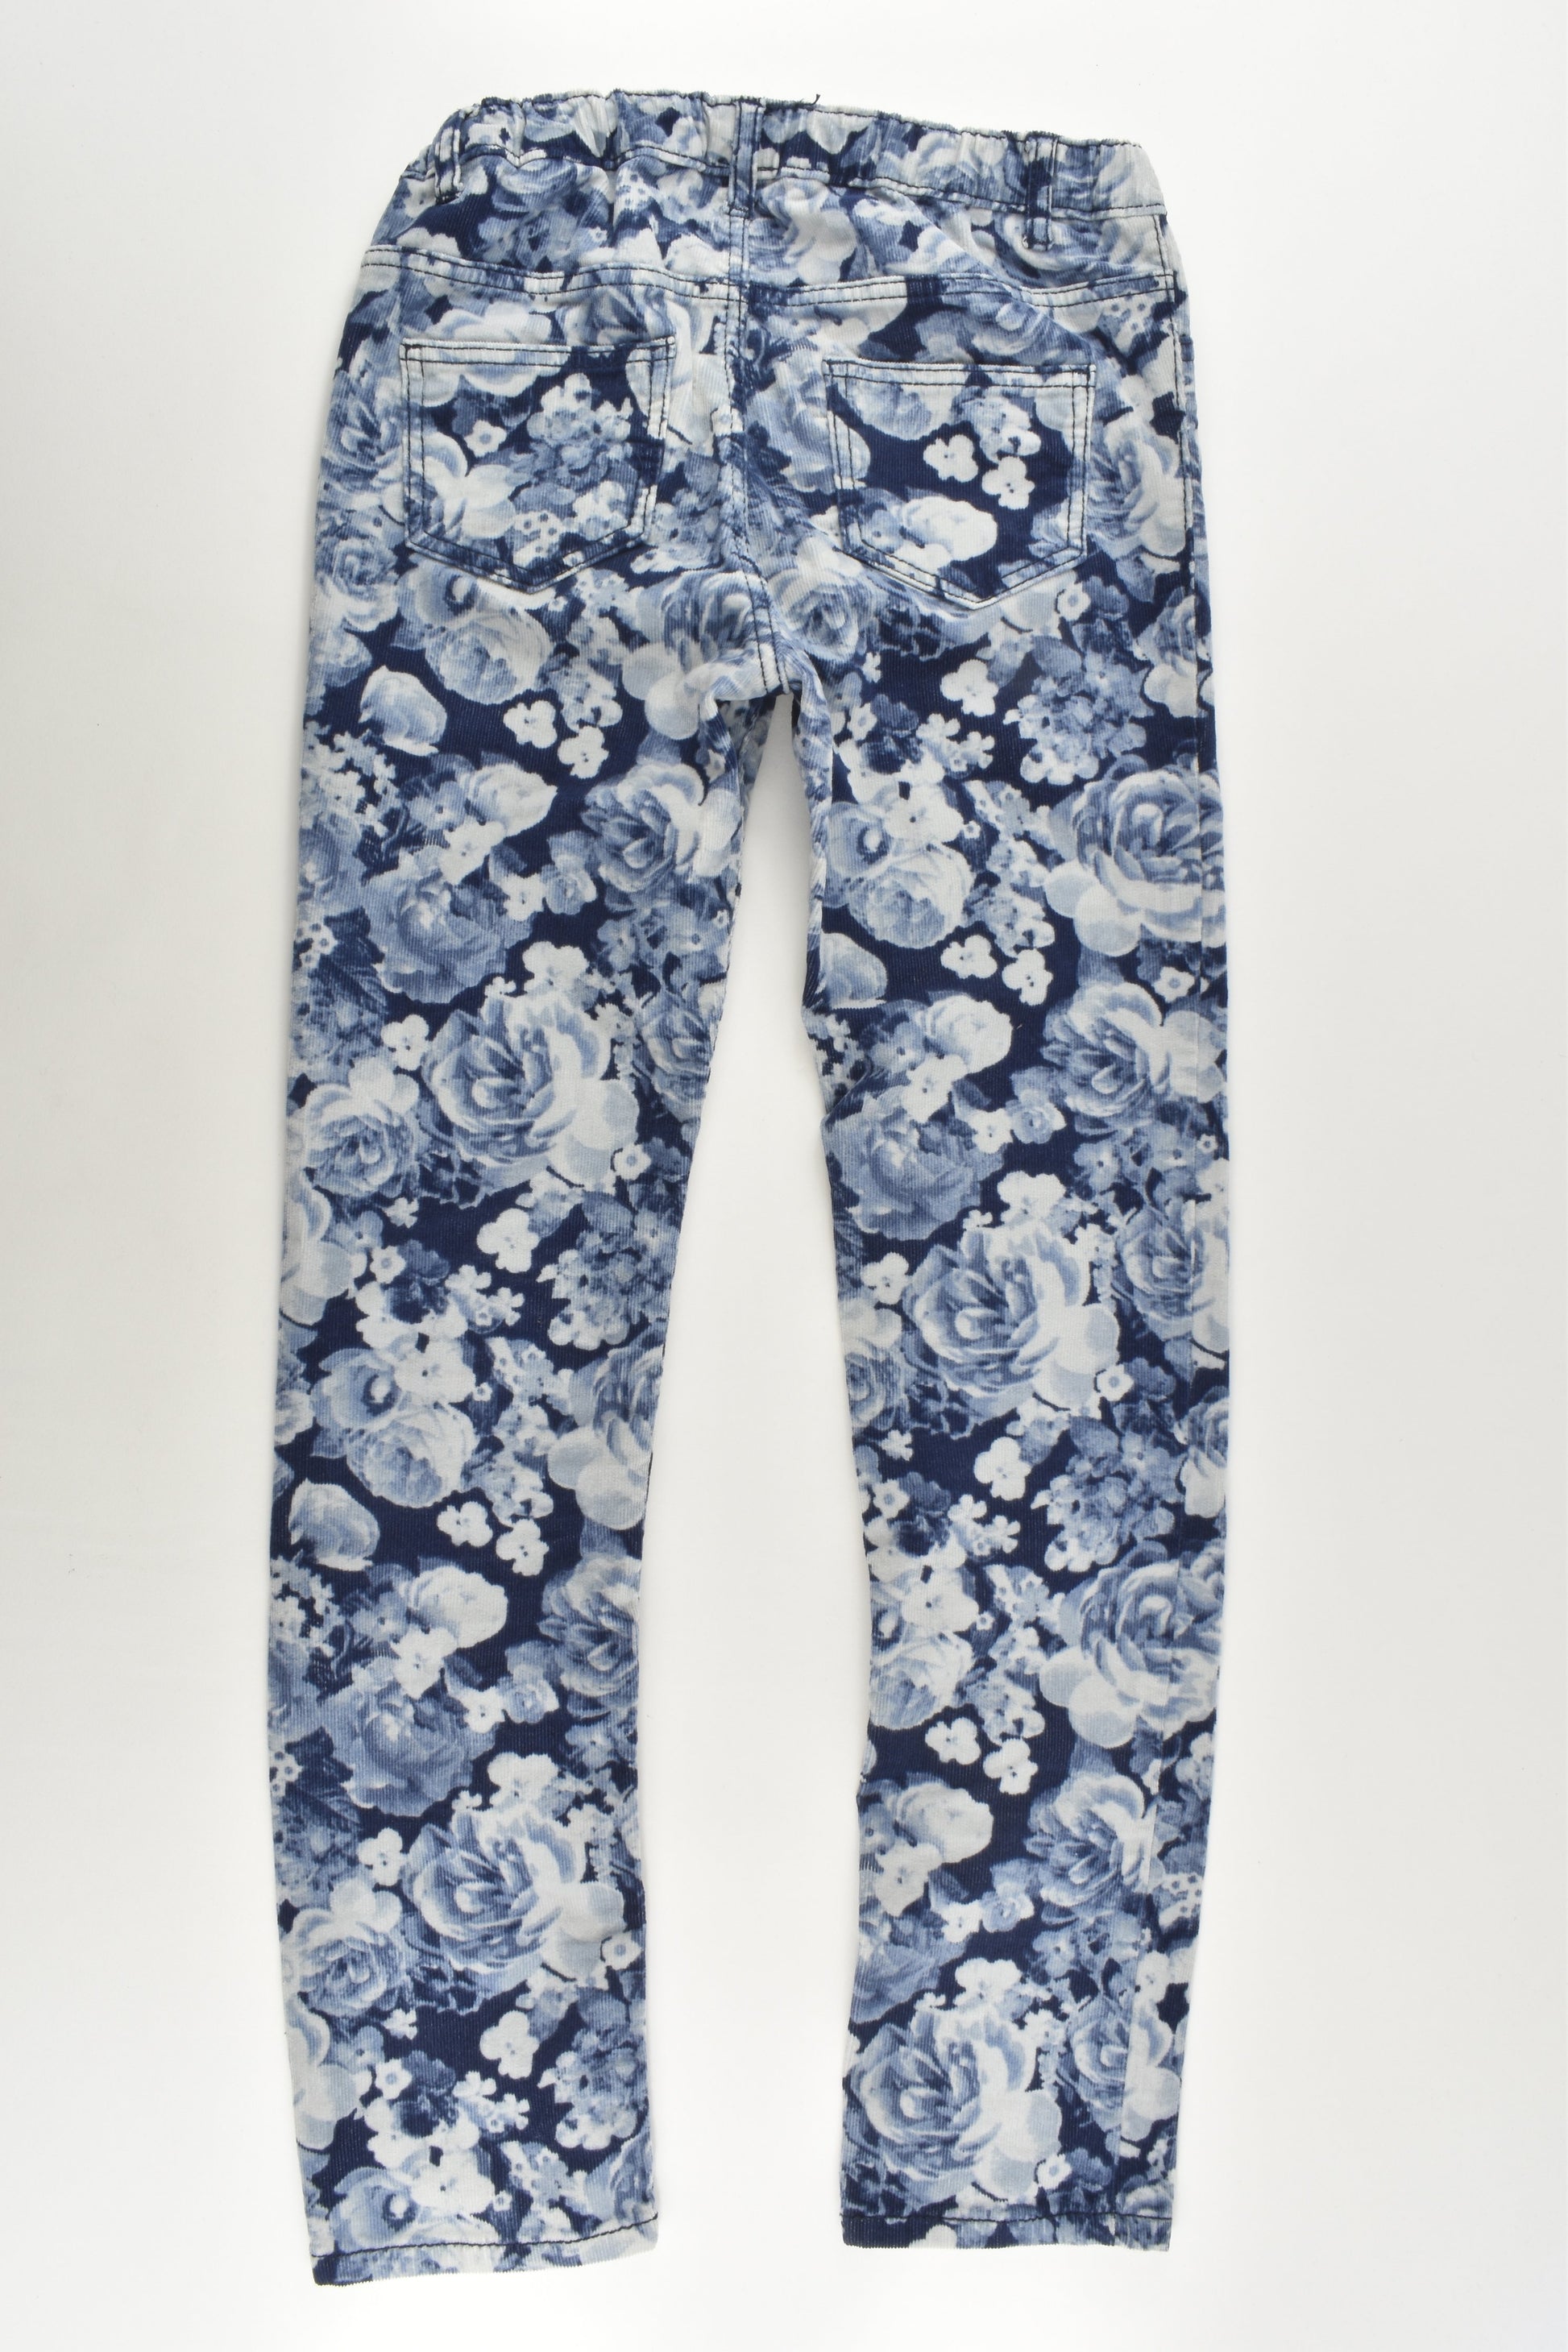 H&M Size 9 Stretchy Roses Cord Pants